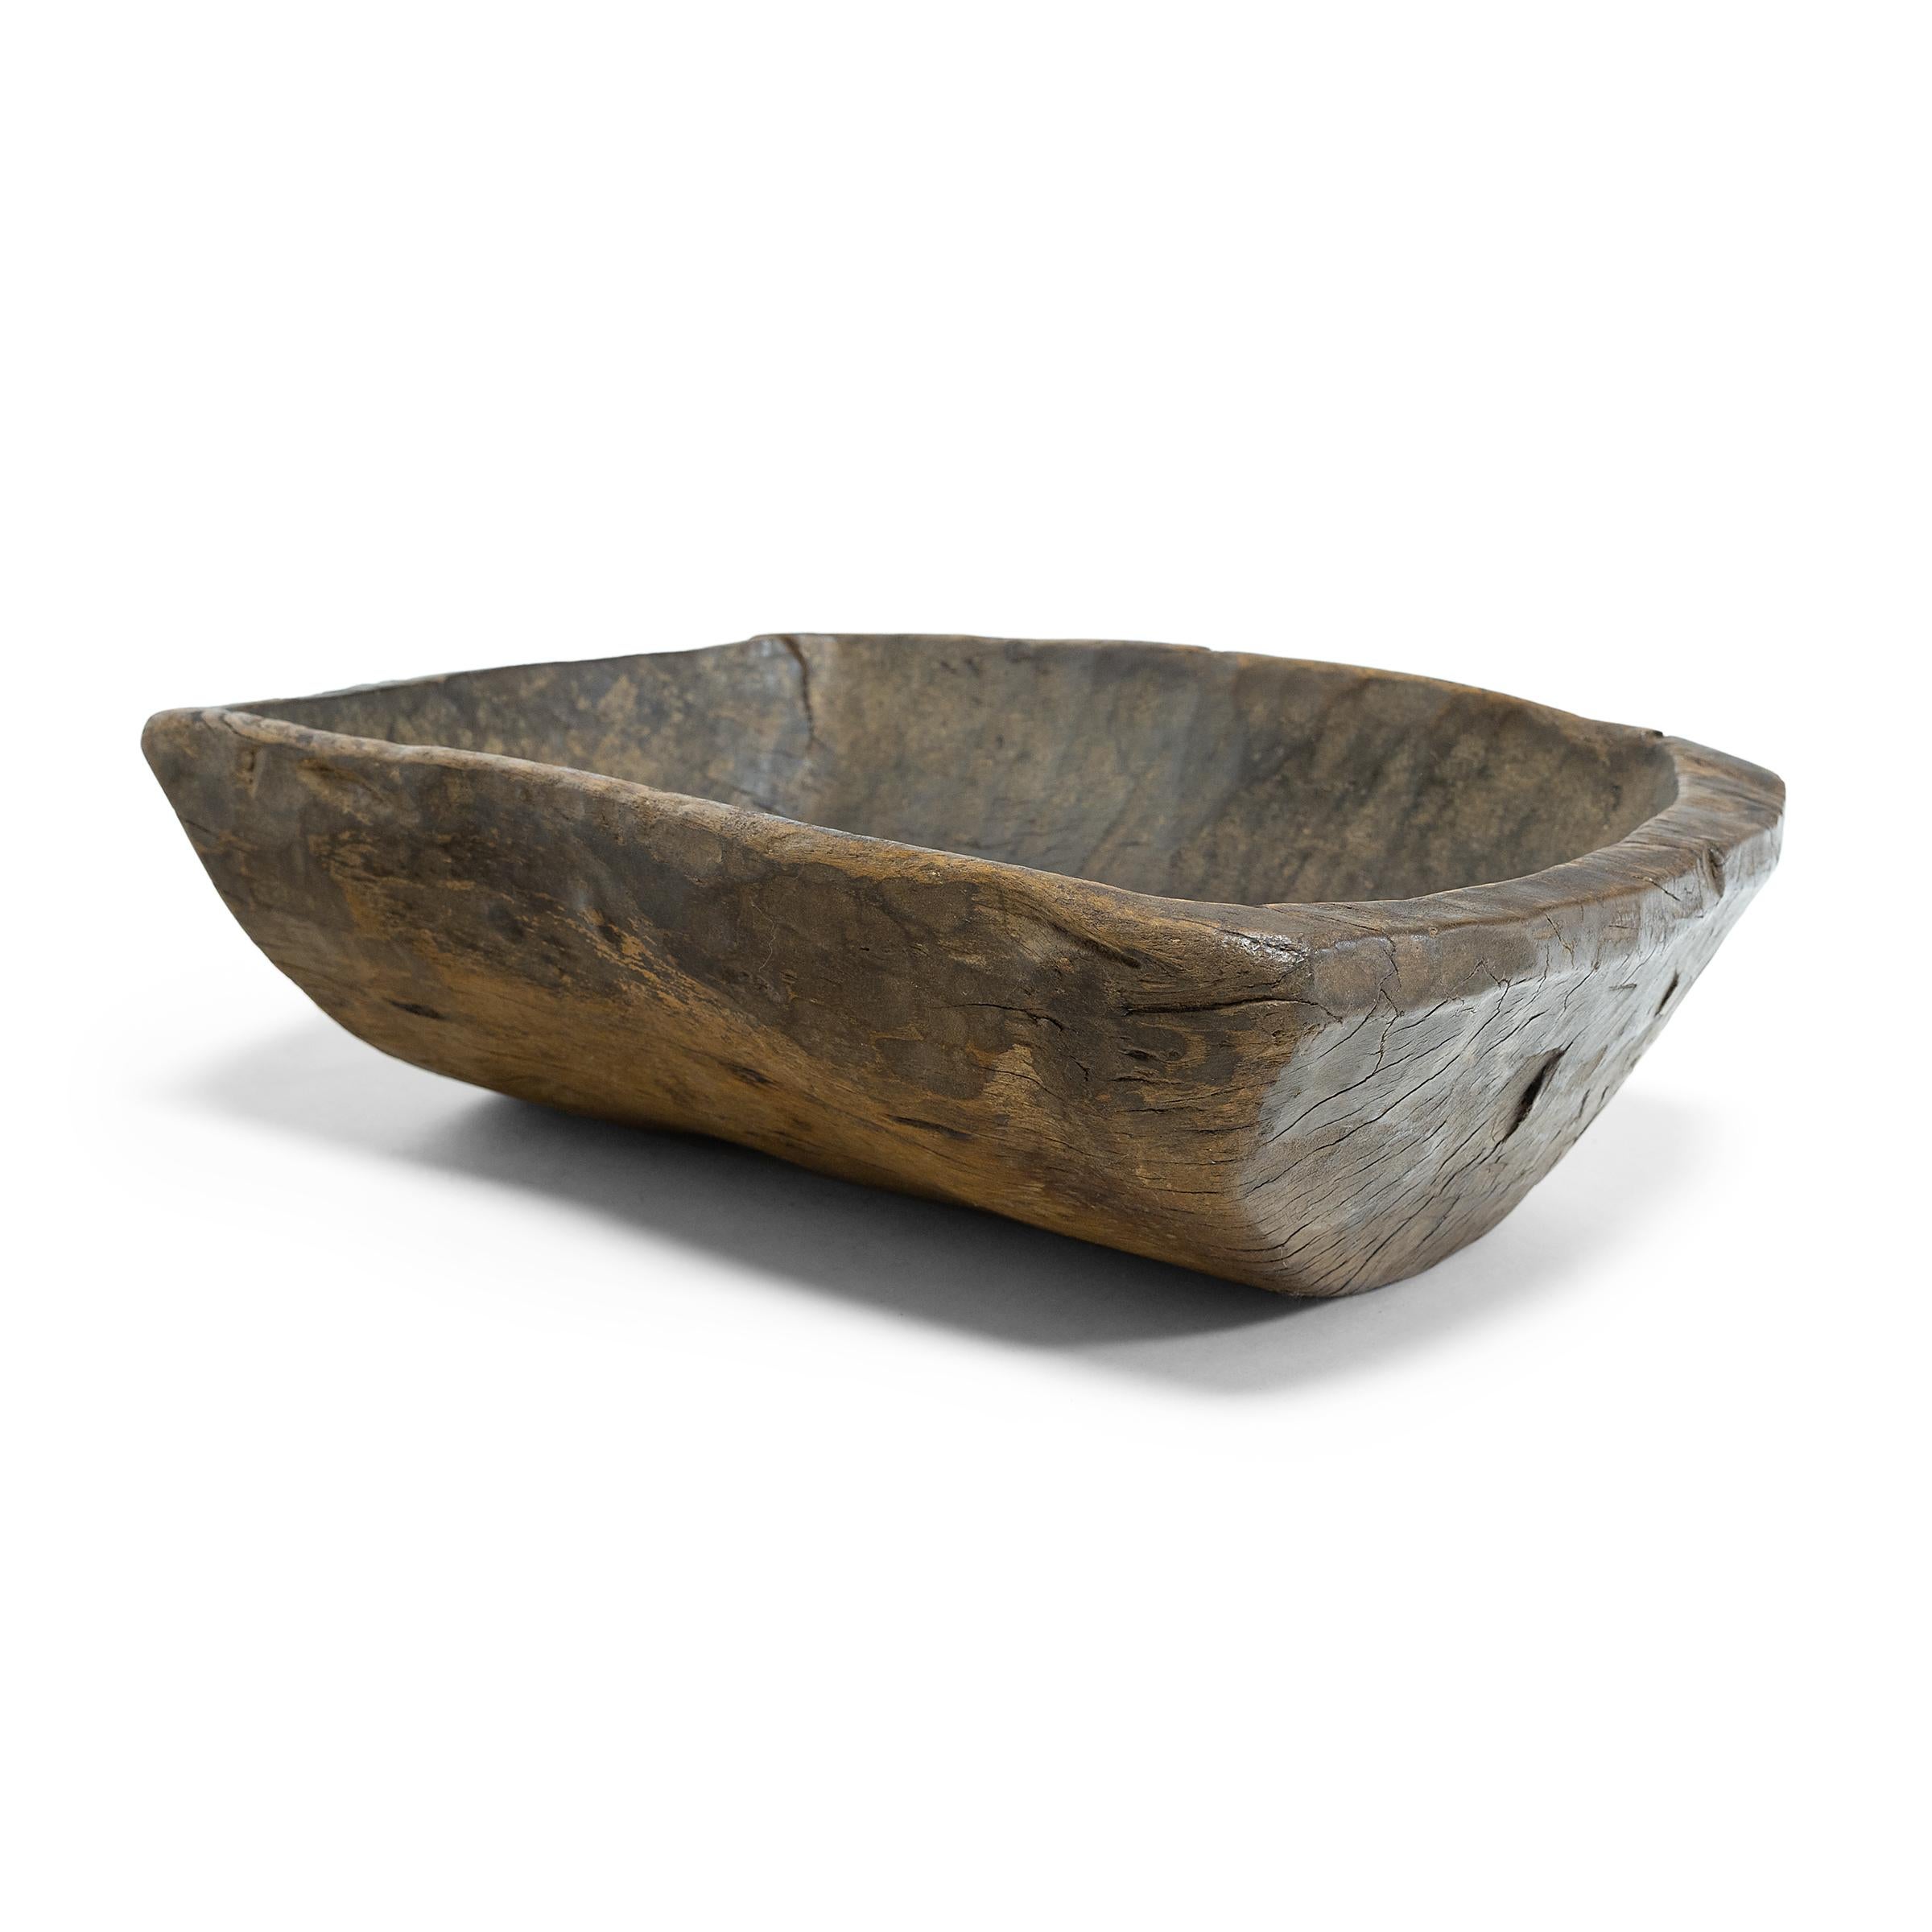 This early-20th century wooden tray from northern China charms with rustic texture and asymmetric form. hand carved from a single block of wood, the tray has a rectangular shape with rounded corners, curved out tapered sides, and a thin rim. Years